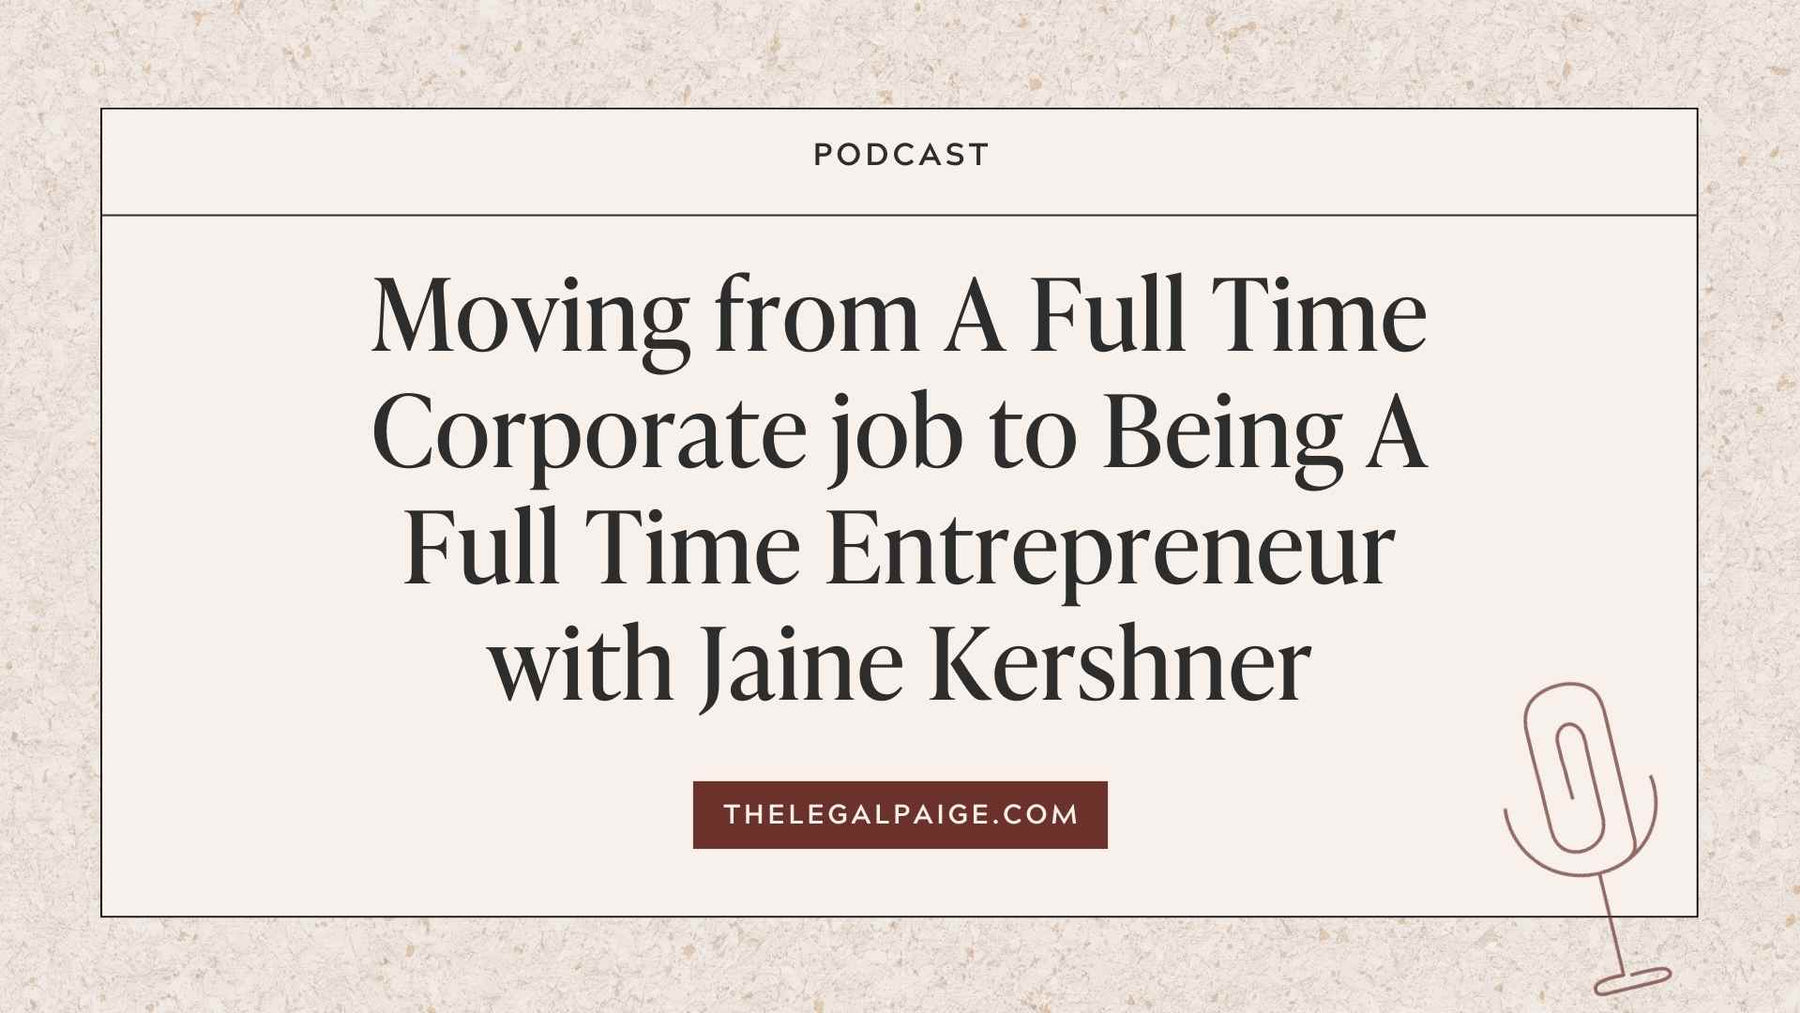 Episode 46: Moving from A Full Time Corporate job to Being A Full Time Entrepreneur with Jaine Kershner